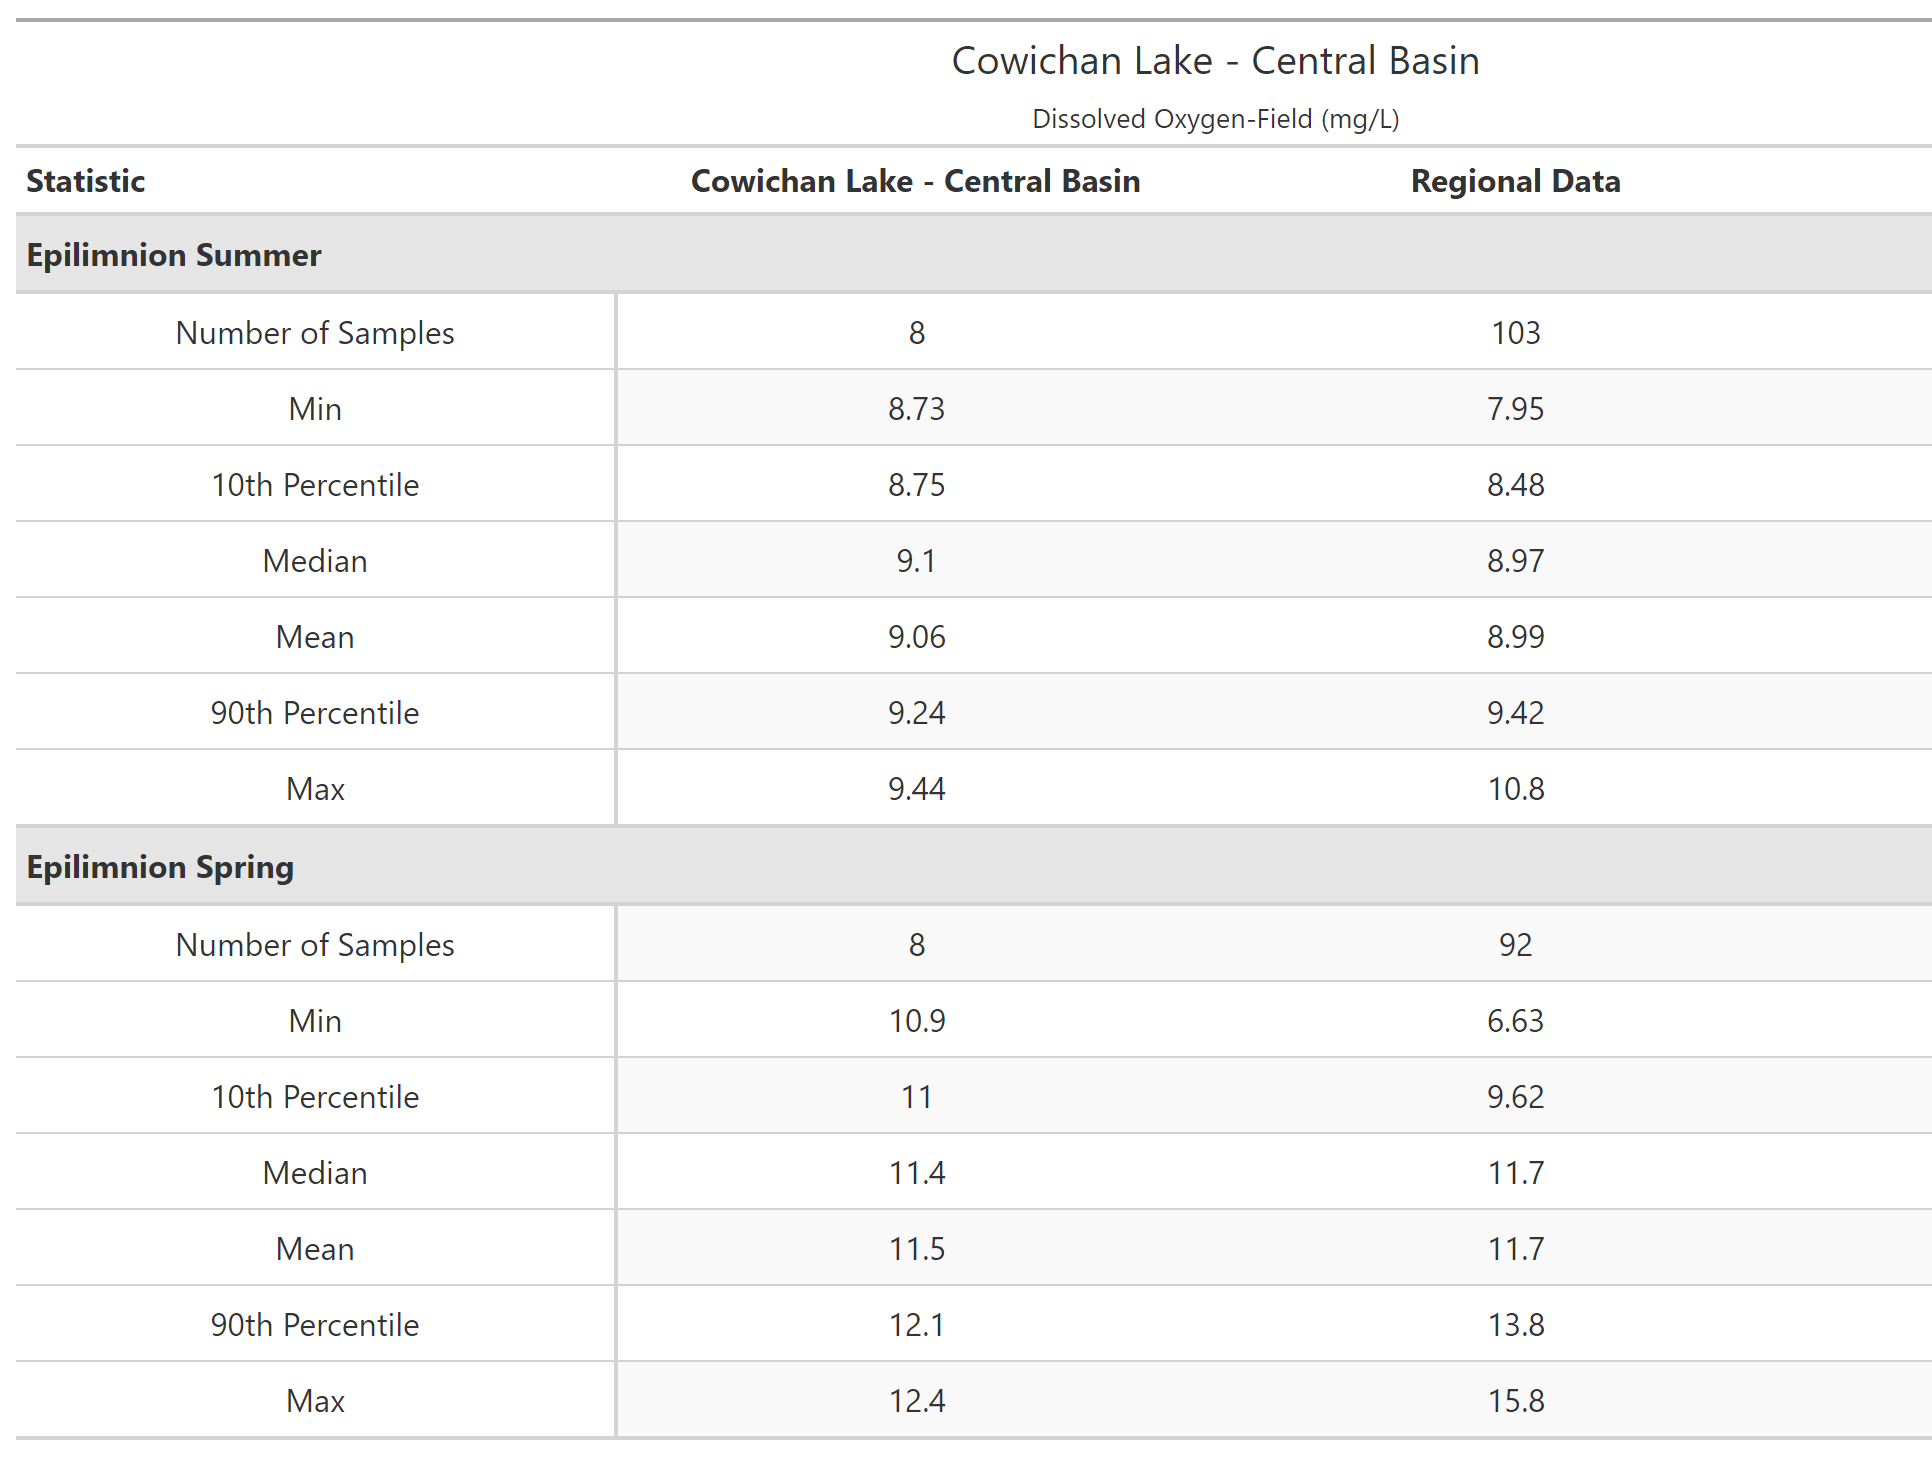 A table of summary statistics for Dissolved Oxygen-Field with comparison to regional data